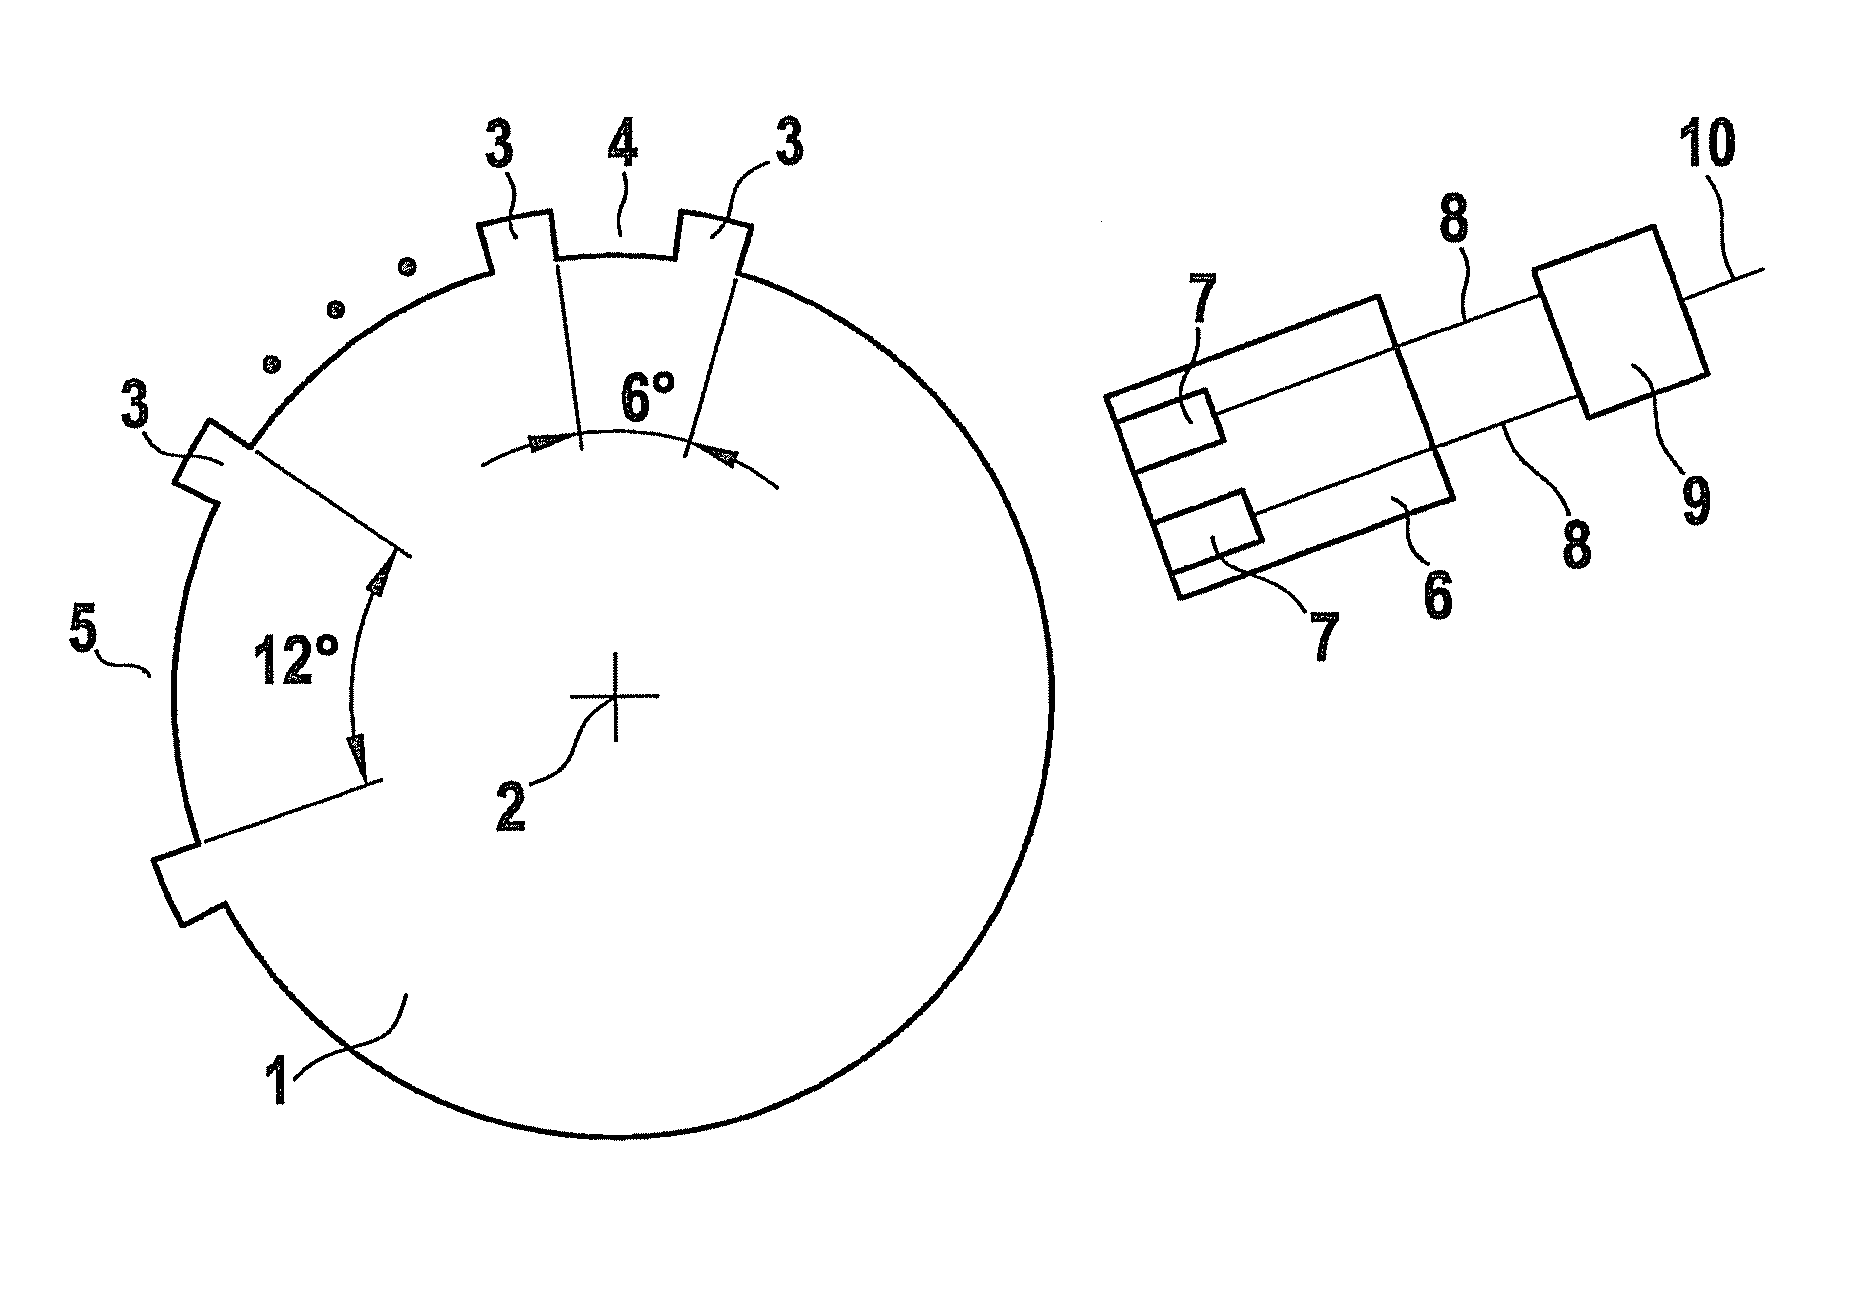 Method for incrementally ascertaining a rotation angle of a shaft